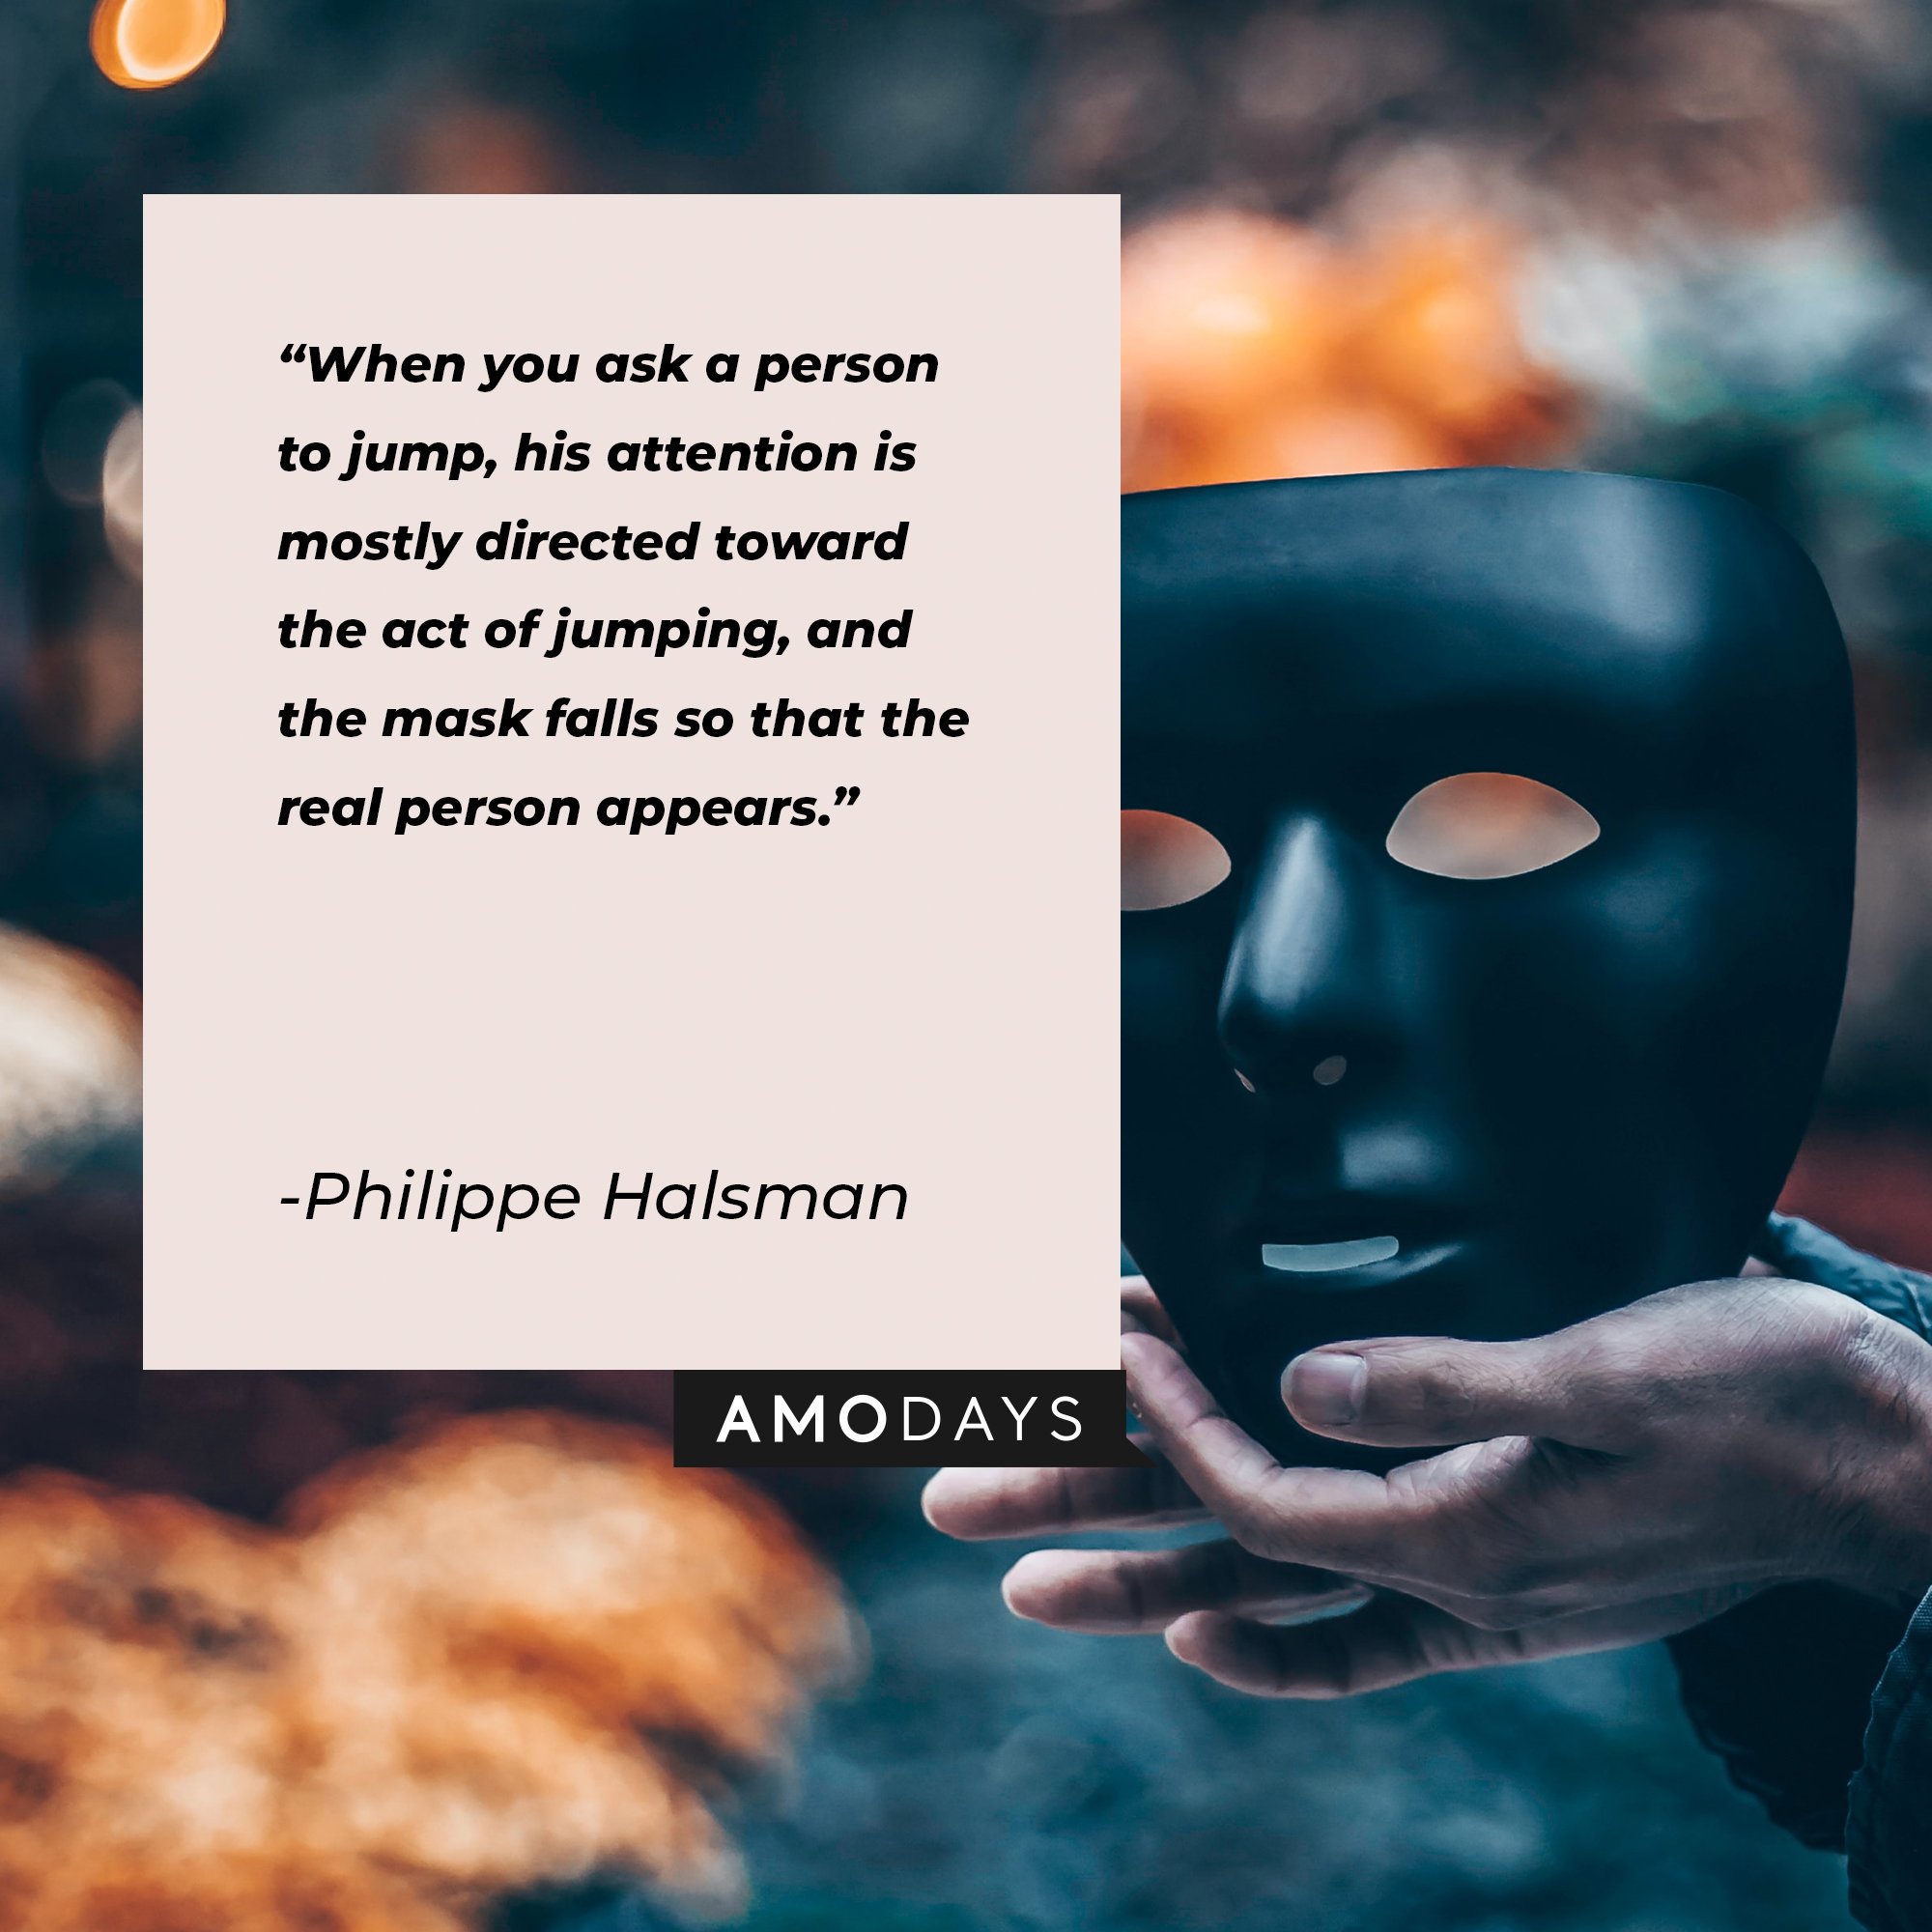 Philippe Halsman's quote: "When you ask a person to jump, his attention is mostly directed toward the act of jumping, and the mask falls so that the real person appears." | Image: AmoDays 